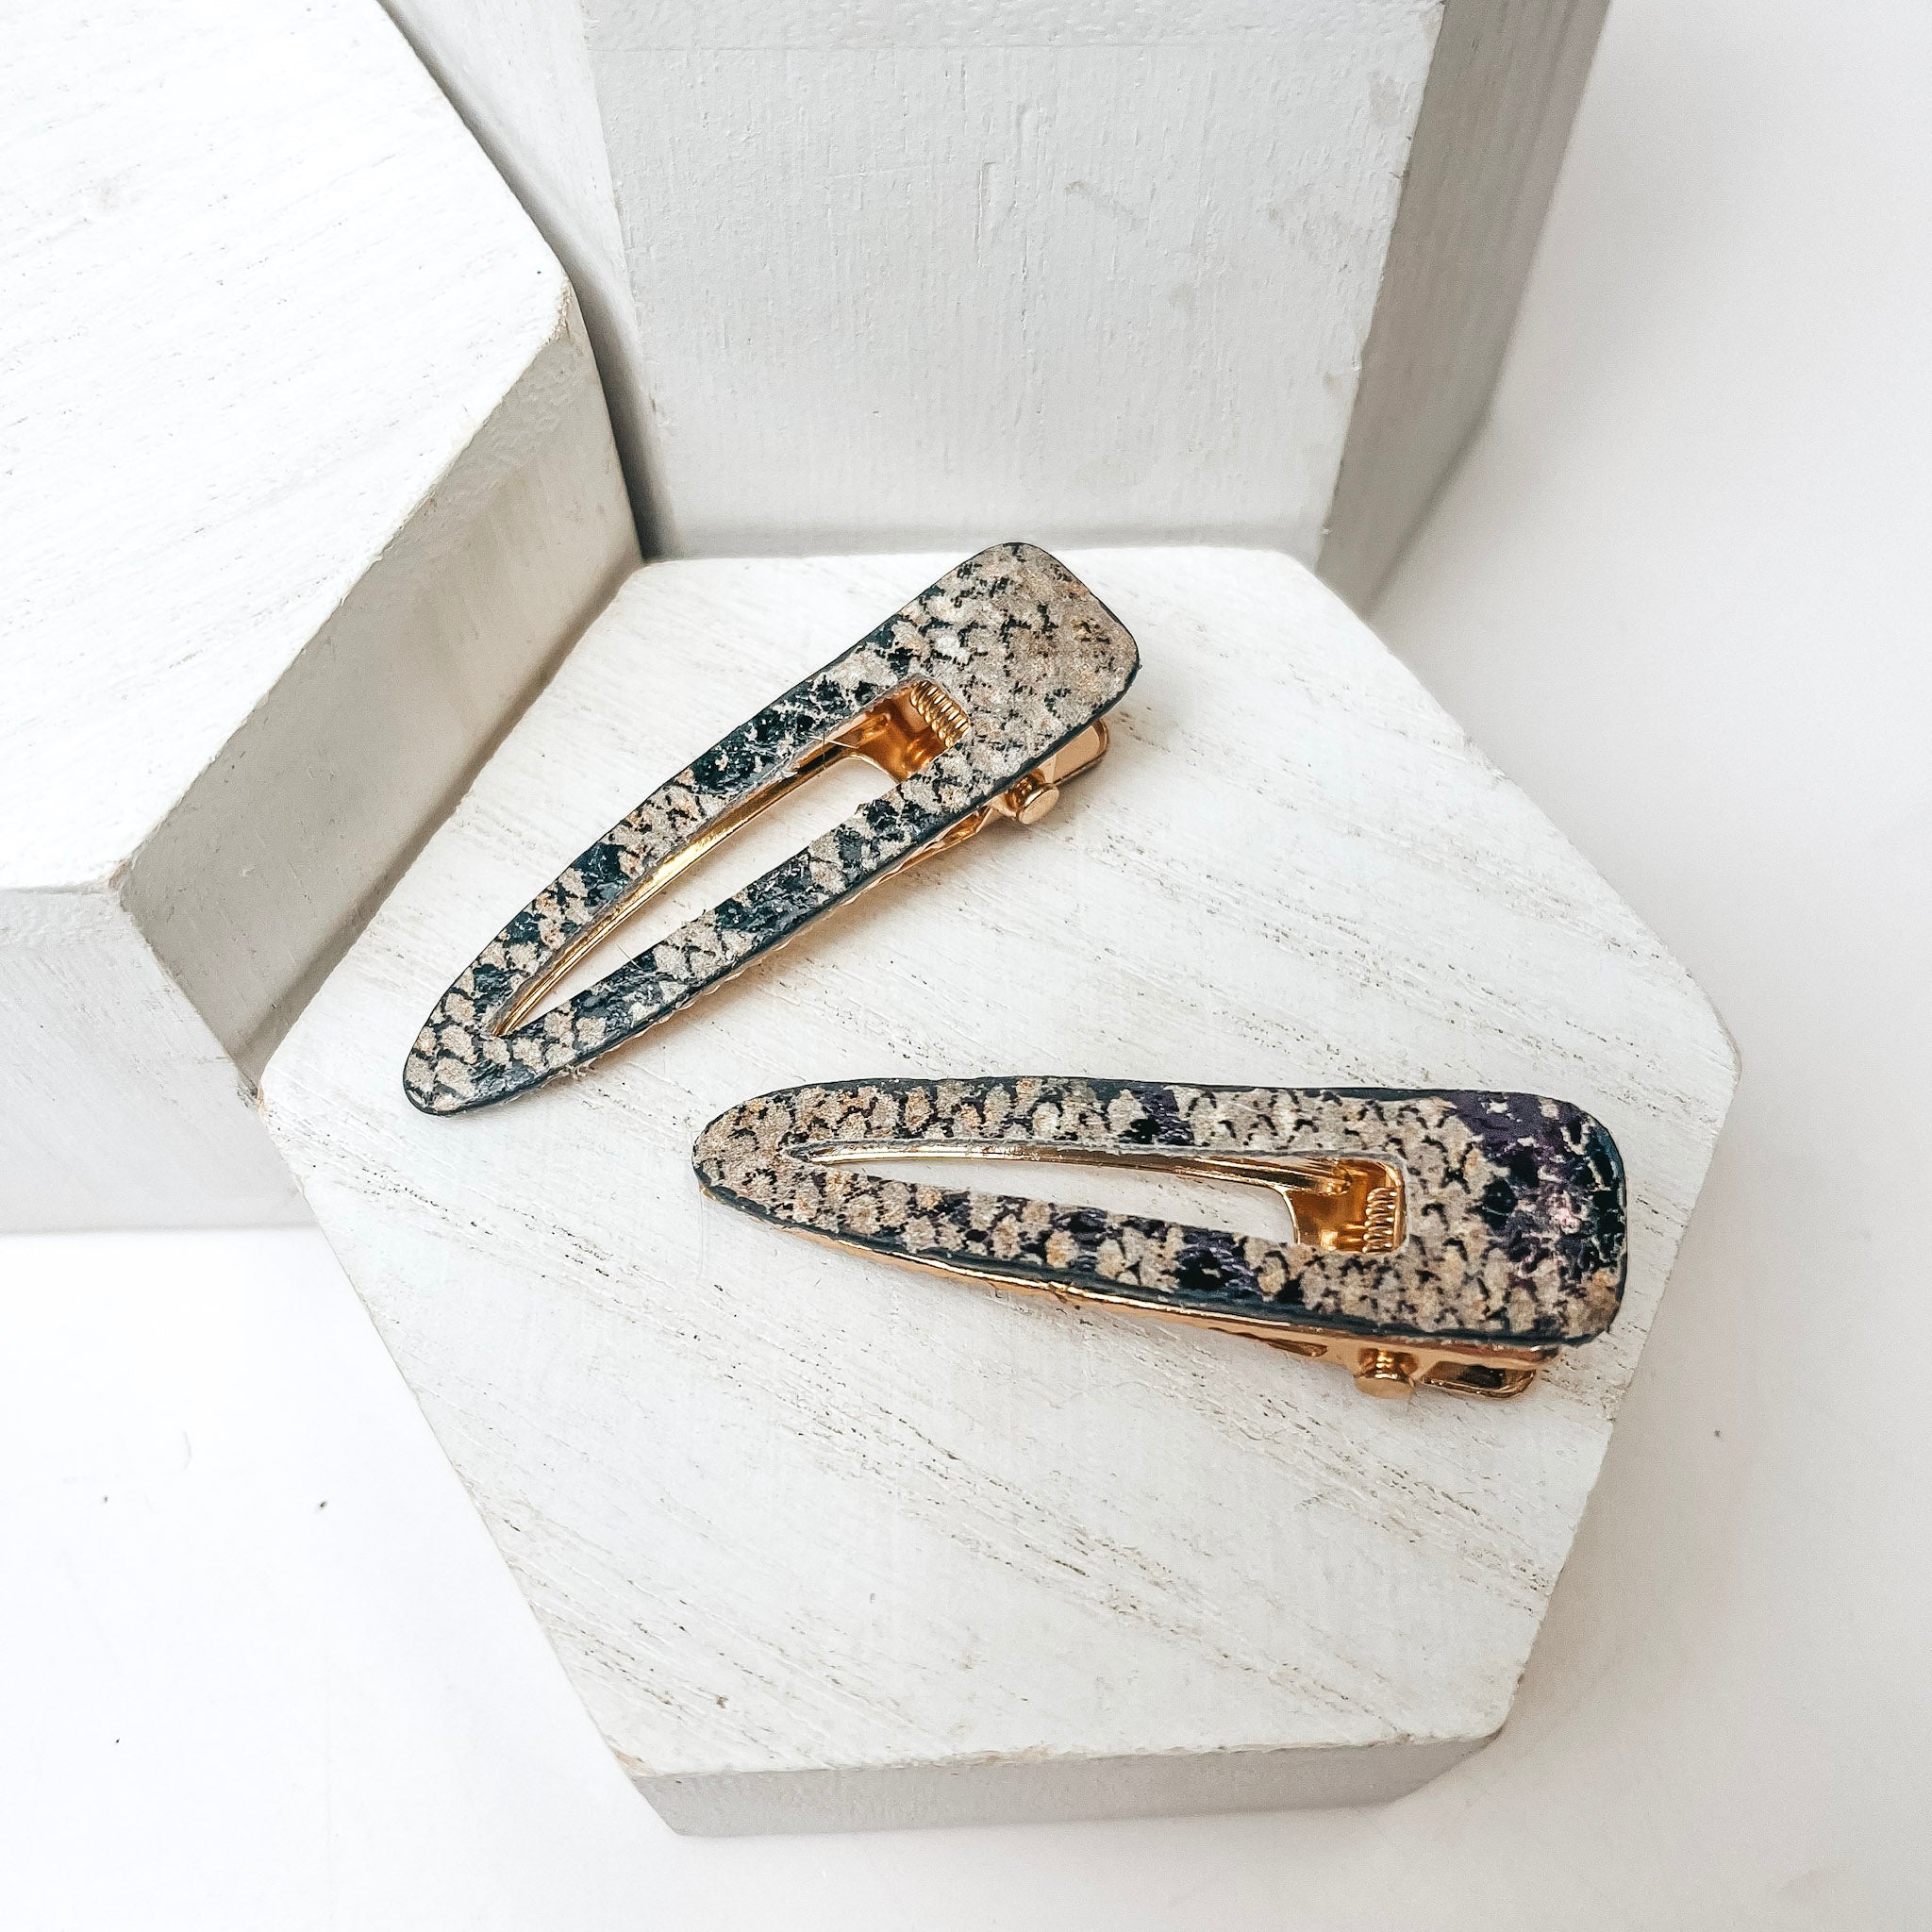 Triangular Hair Clip Pair in Snakeskin - Giddy Up Glamour Boutique